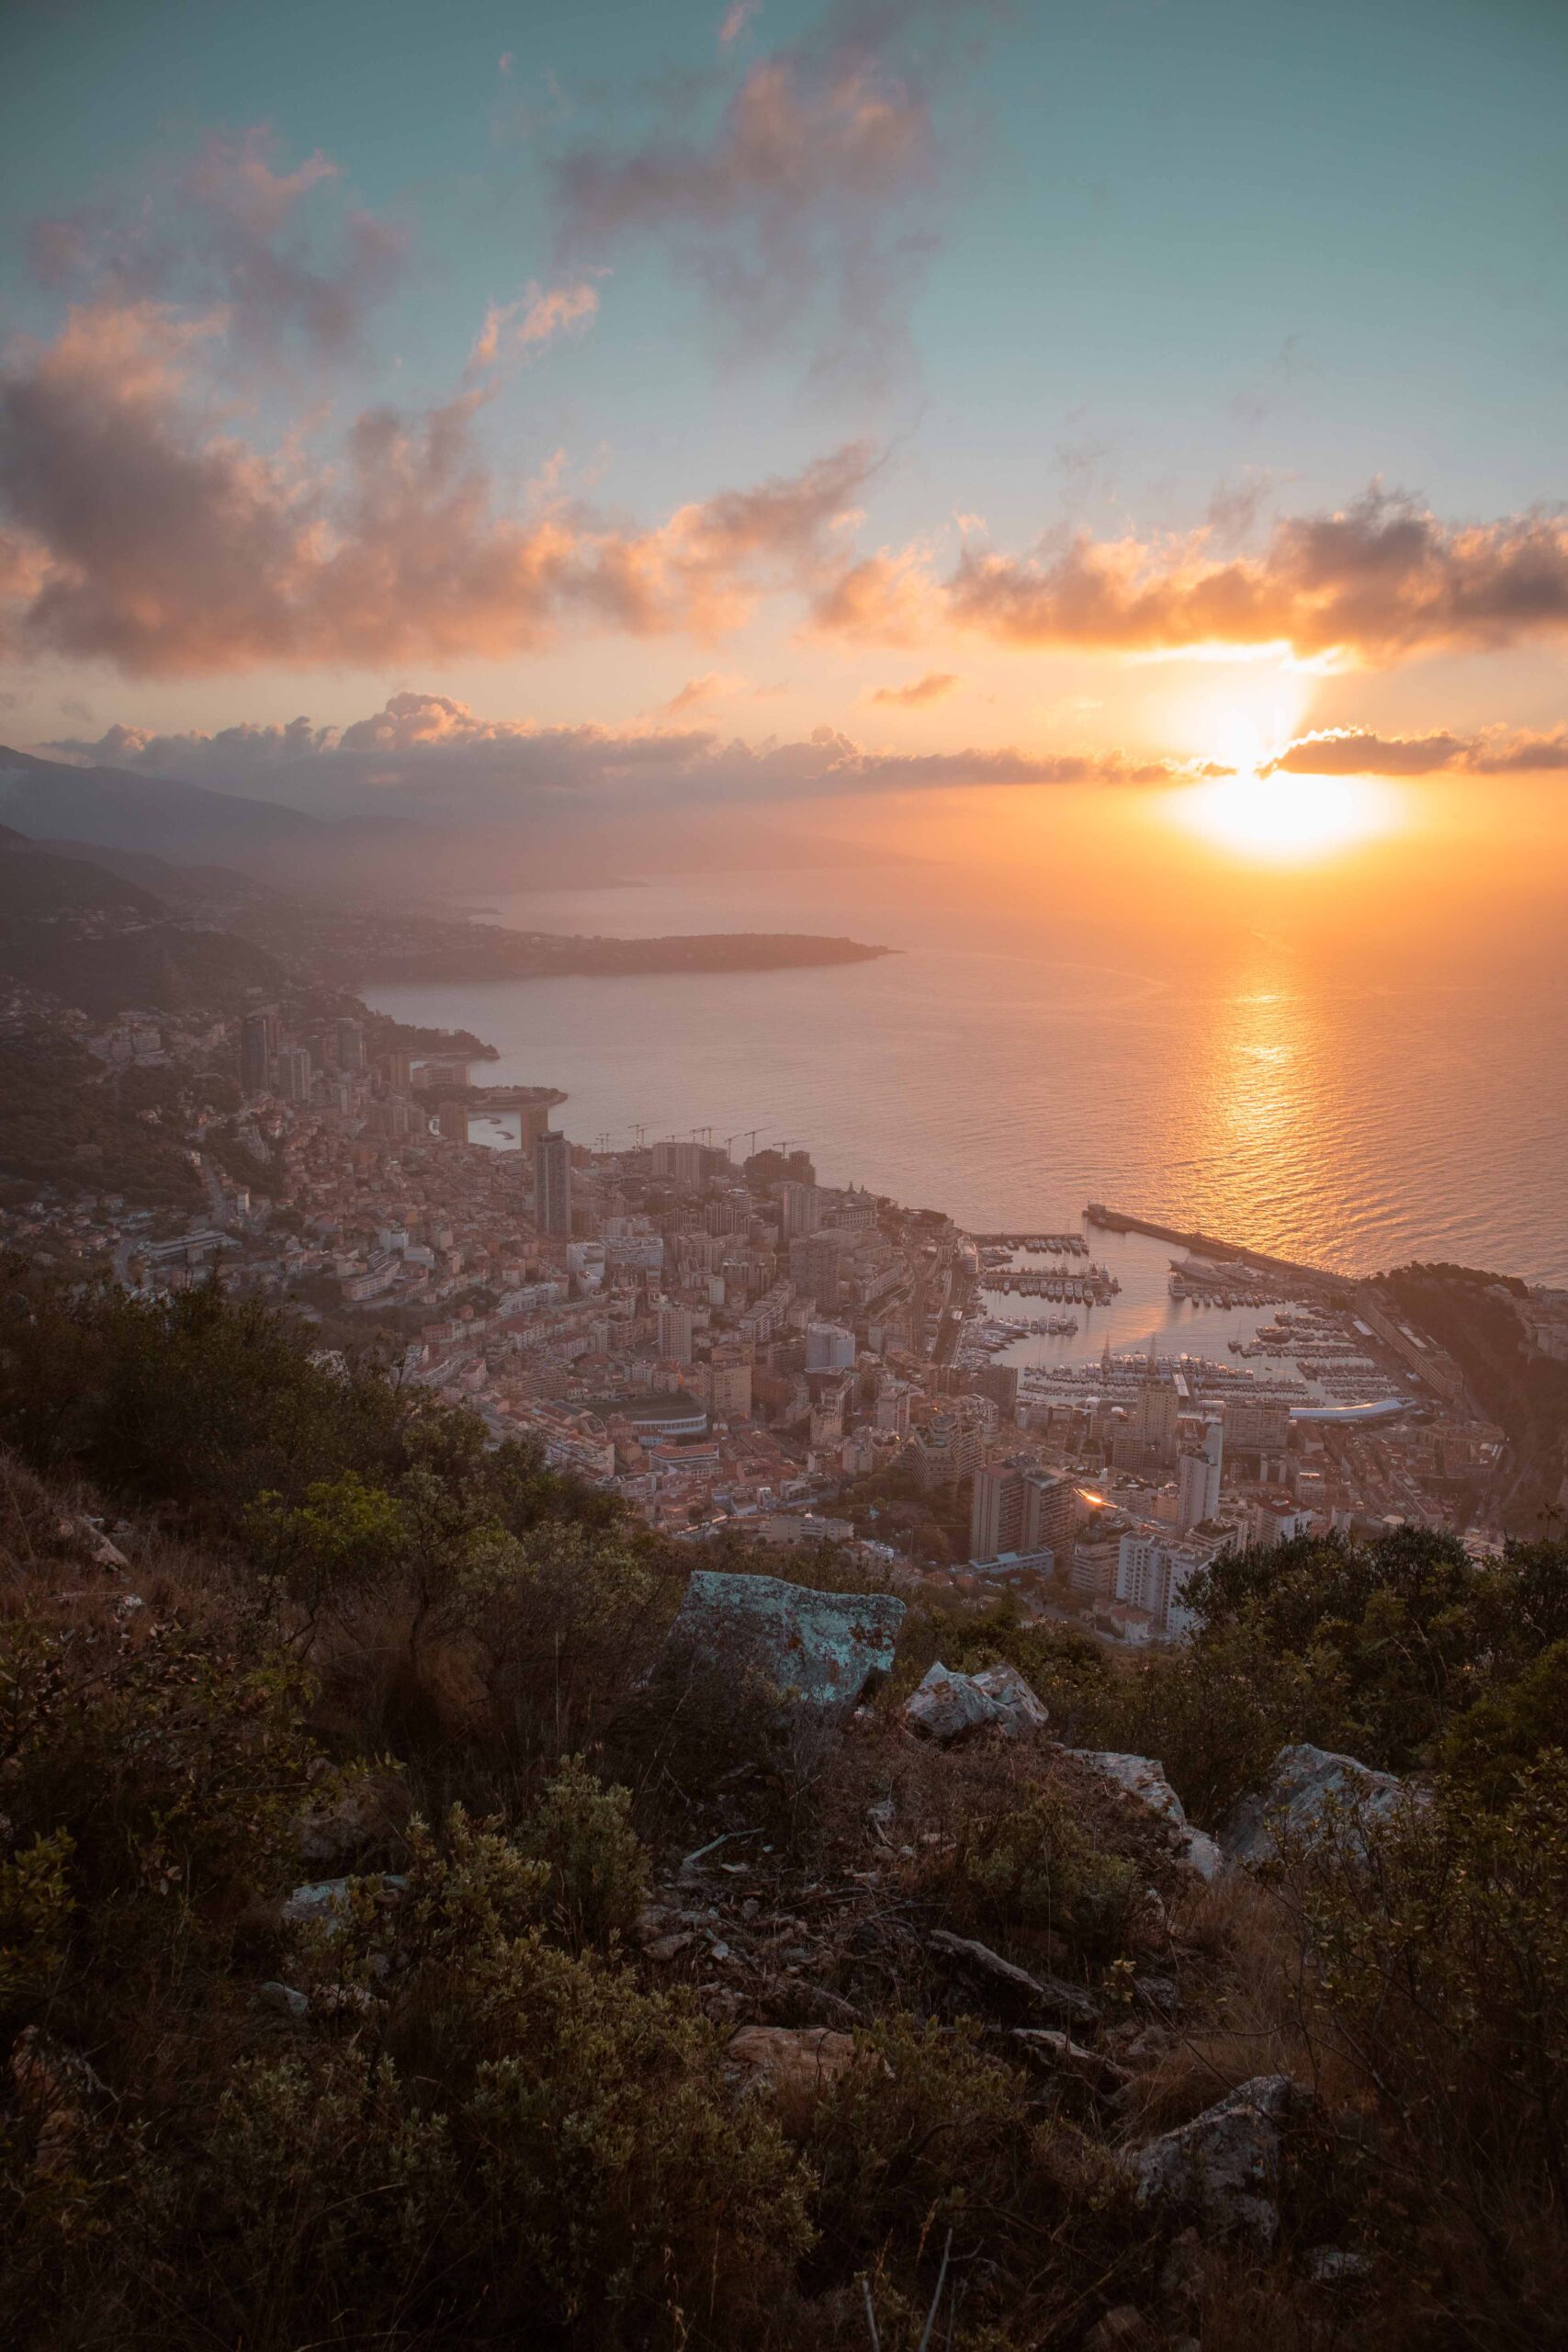 Panoramic view of Monaco at sunrise as seen from the Tête de Chien rock promontory viewpoint near La Turbie Village, France